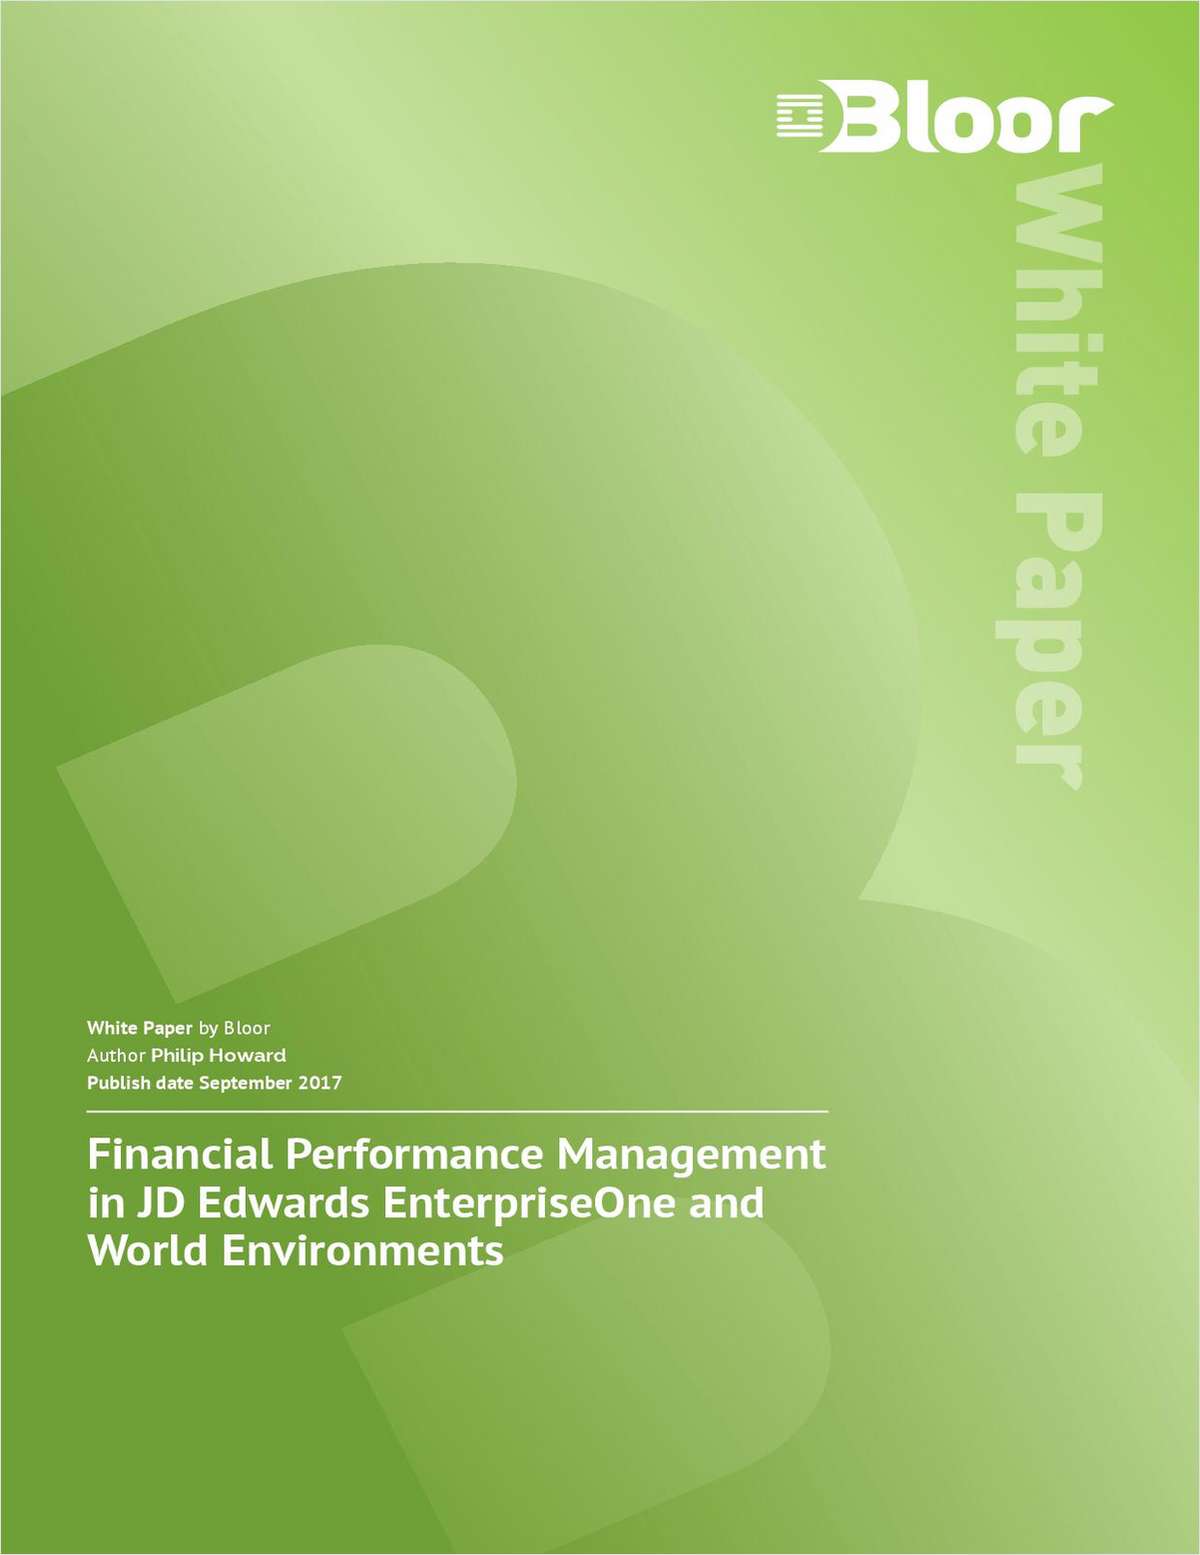 Performance Management in JD Edwards EnterpriseOne and World